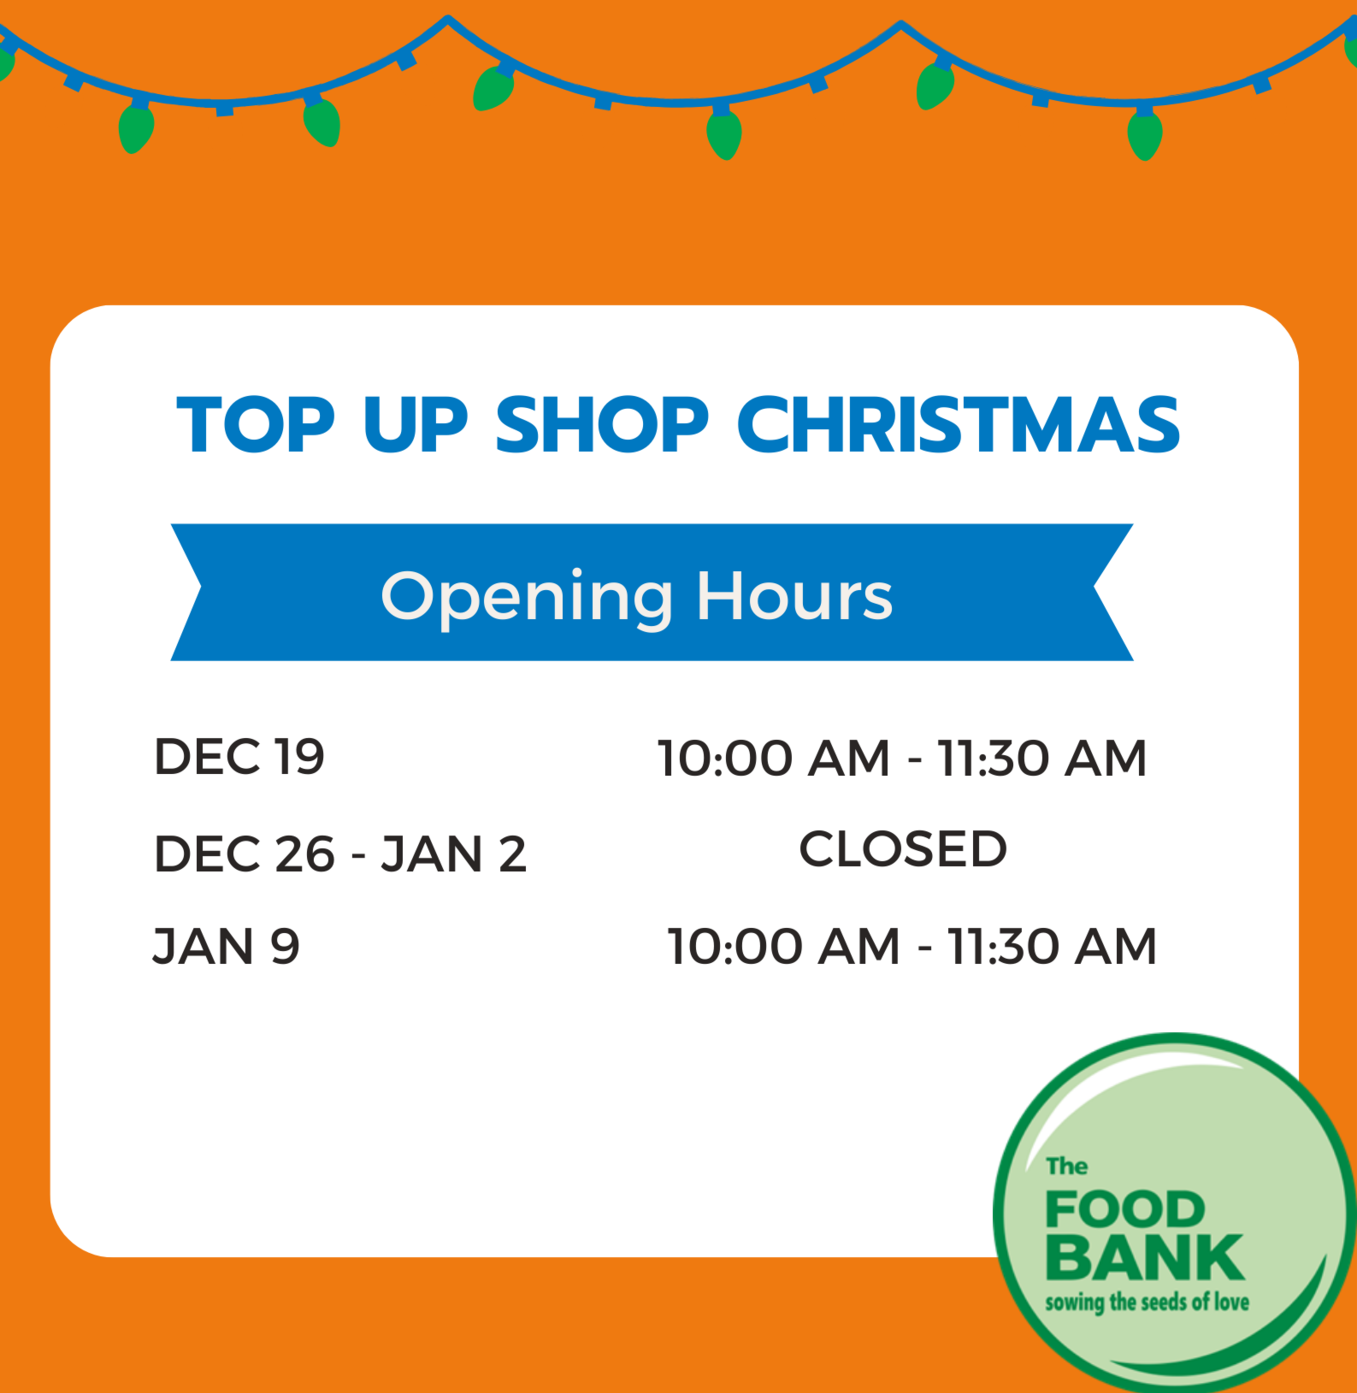 Top Up Shop Christmas Opening Hours